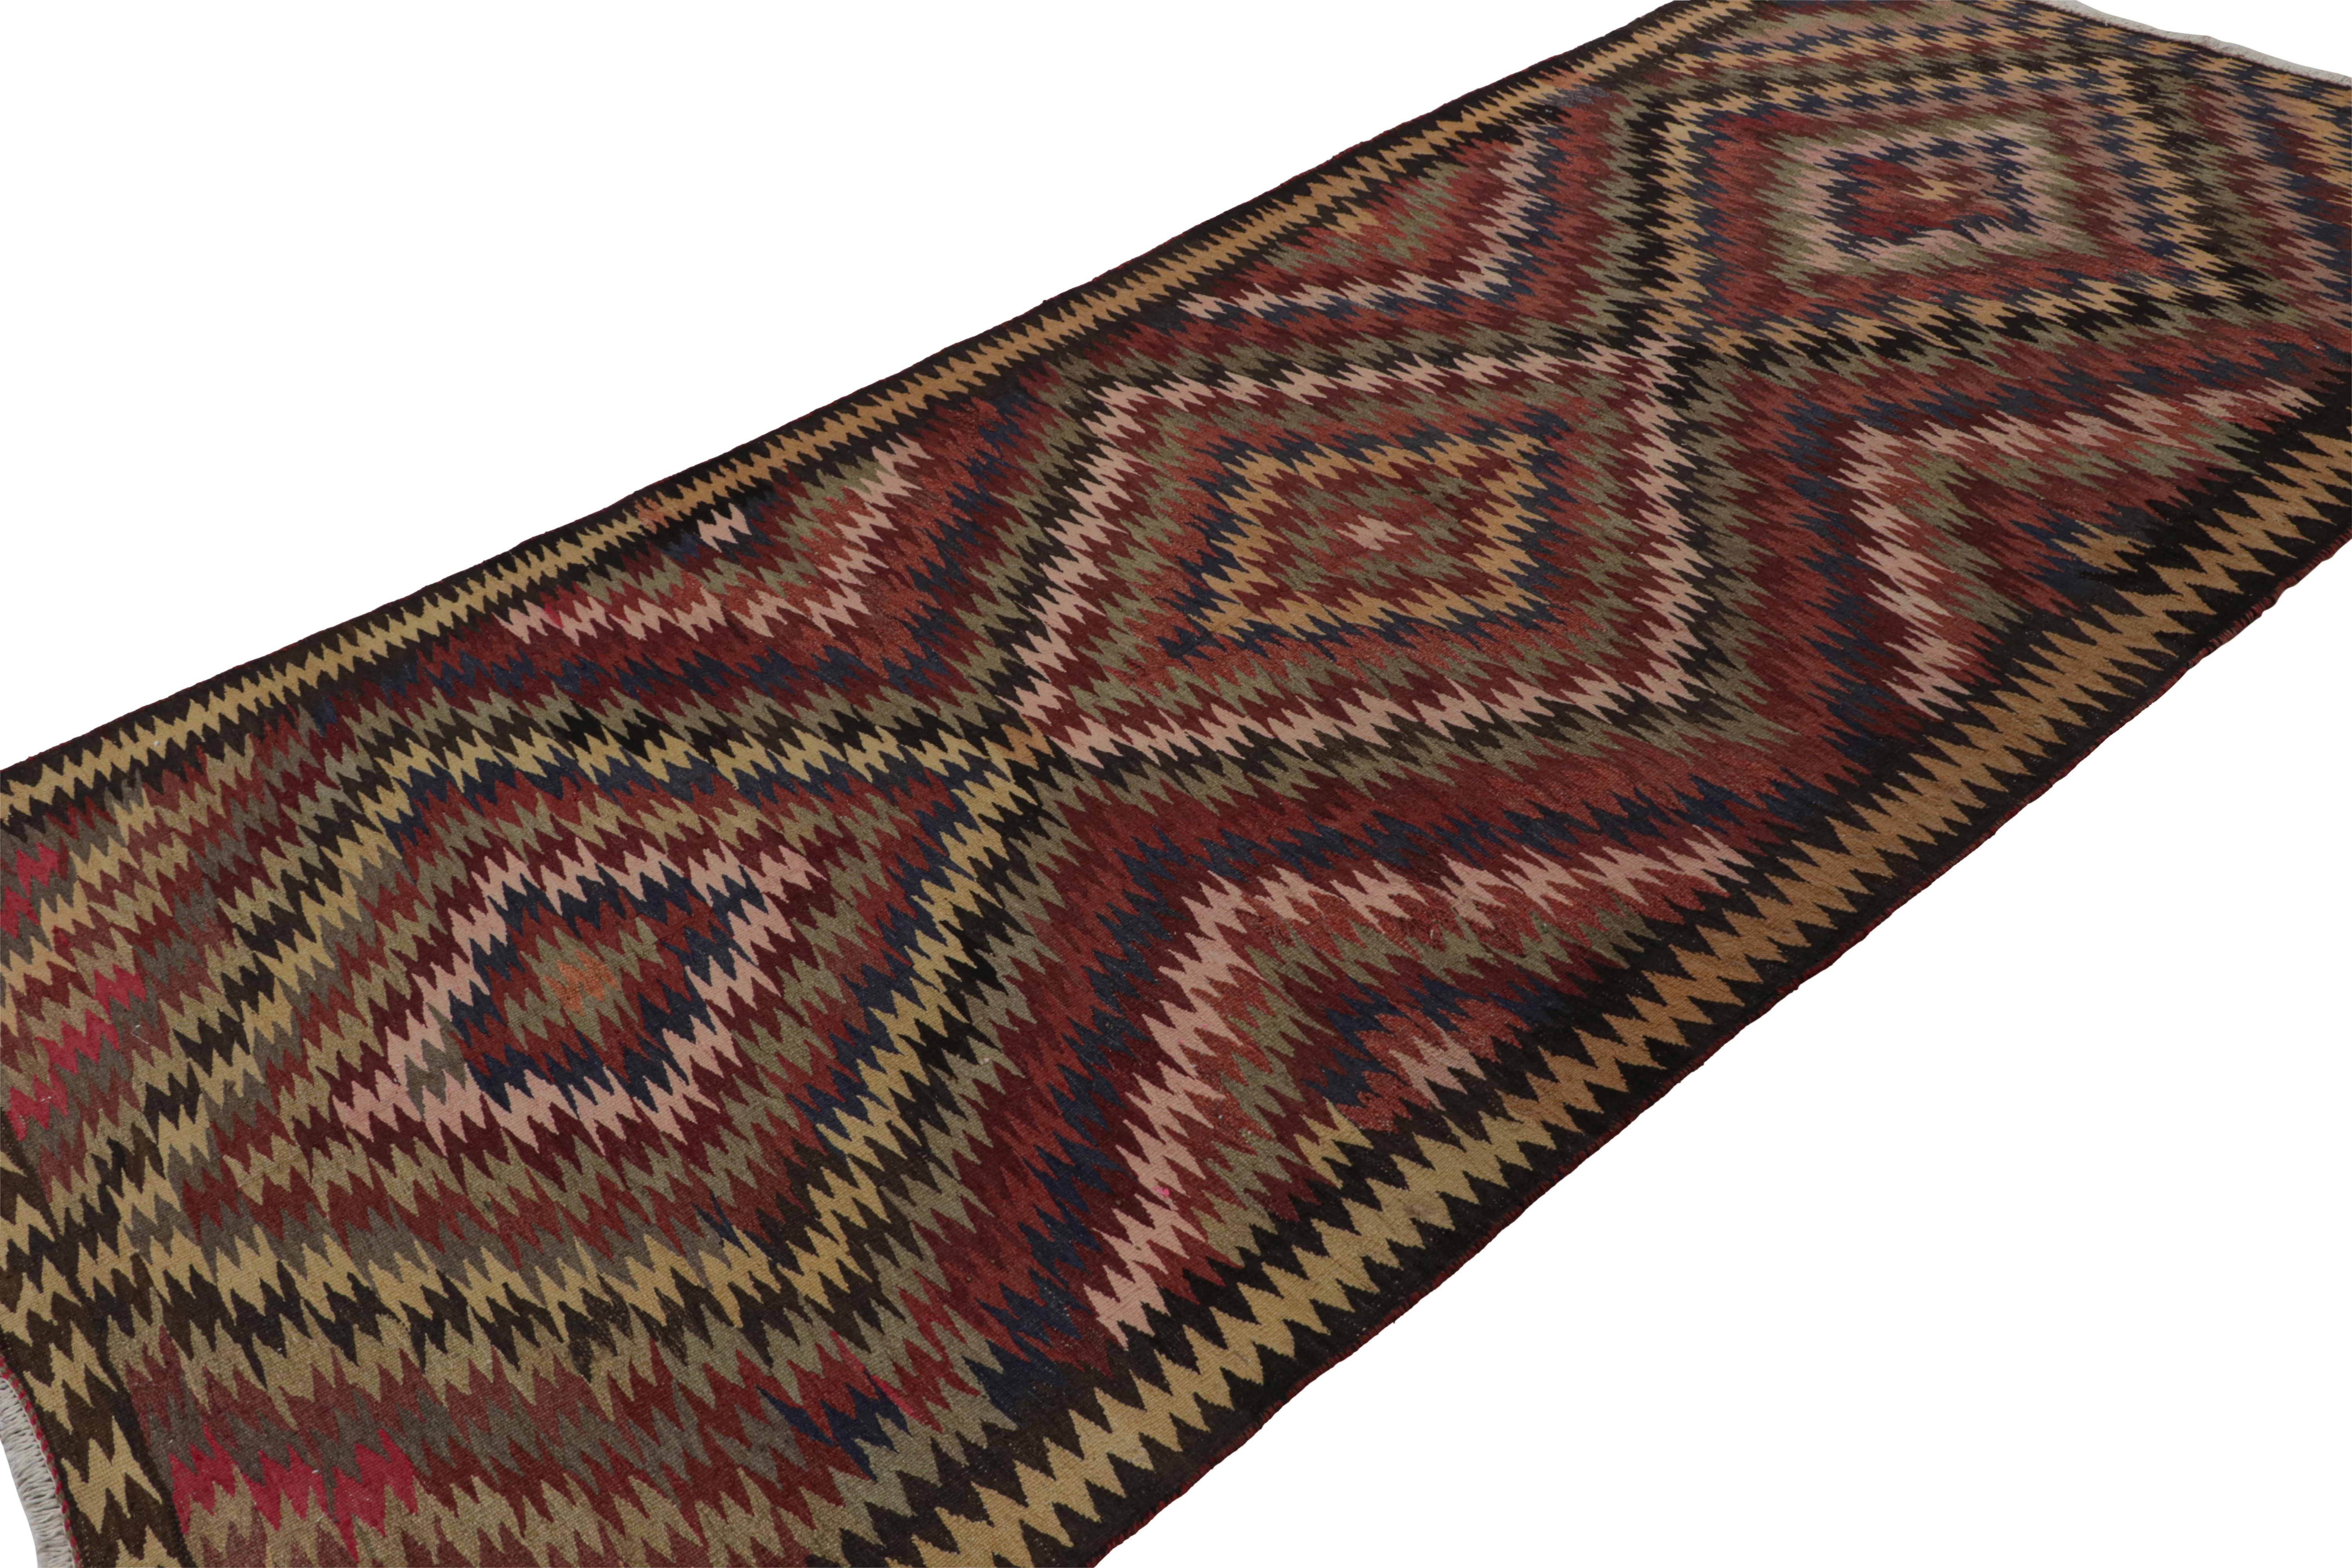 This vintage 5x11 Persian Kilim is the latest to join Rug & Kilim’s selection of vintage flatweaves. 

On the Design:

Handwoven in wool circa 1950-1960, the piece is full of intricate, playful details. The gorgeous tribal piece carries serrated